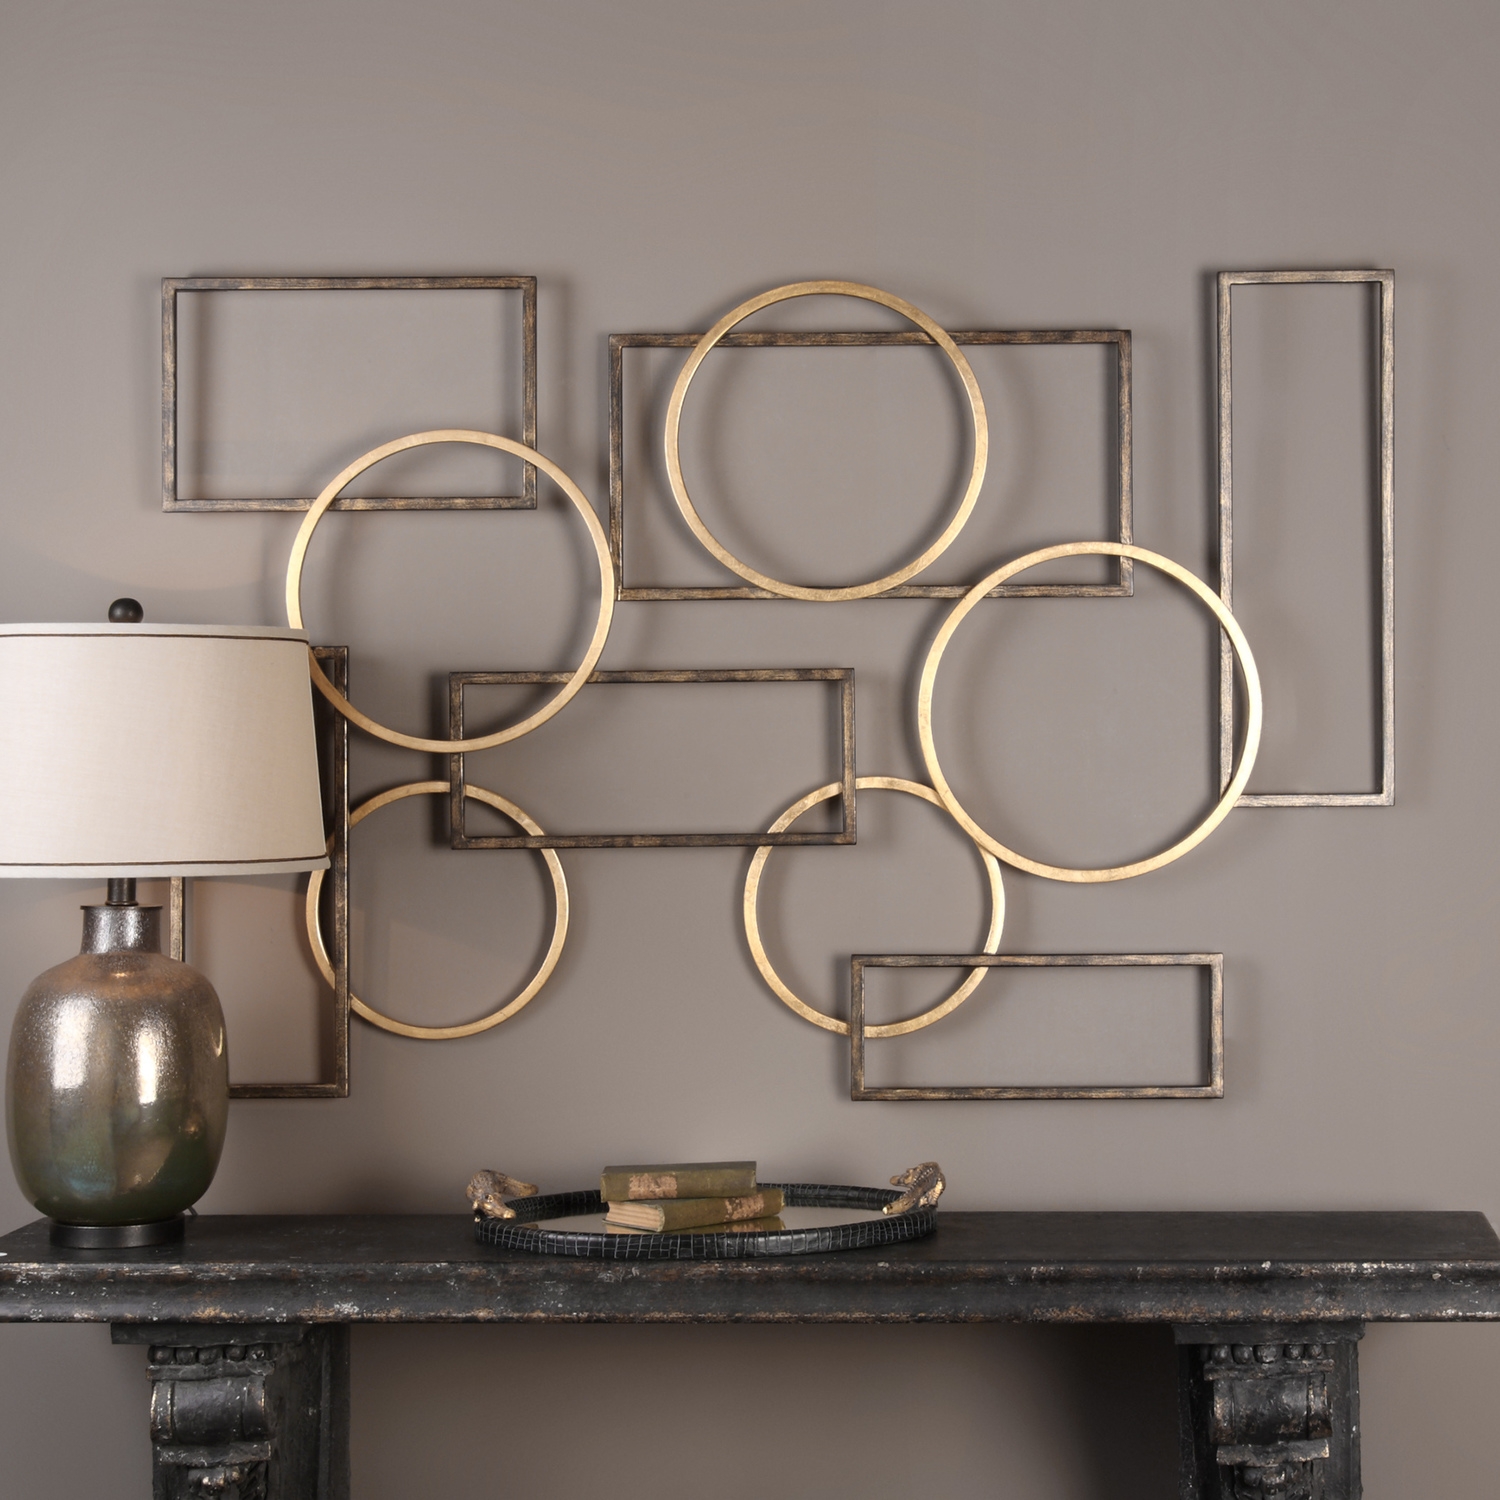 toscano wall sculptures Uttermost Metal Wall Art A Fun Combination Of Iron Circles And Rectangles In Rich Brushed Bronze And Gold Leaf.